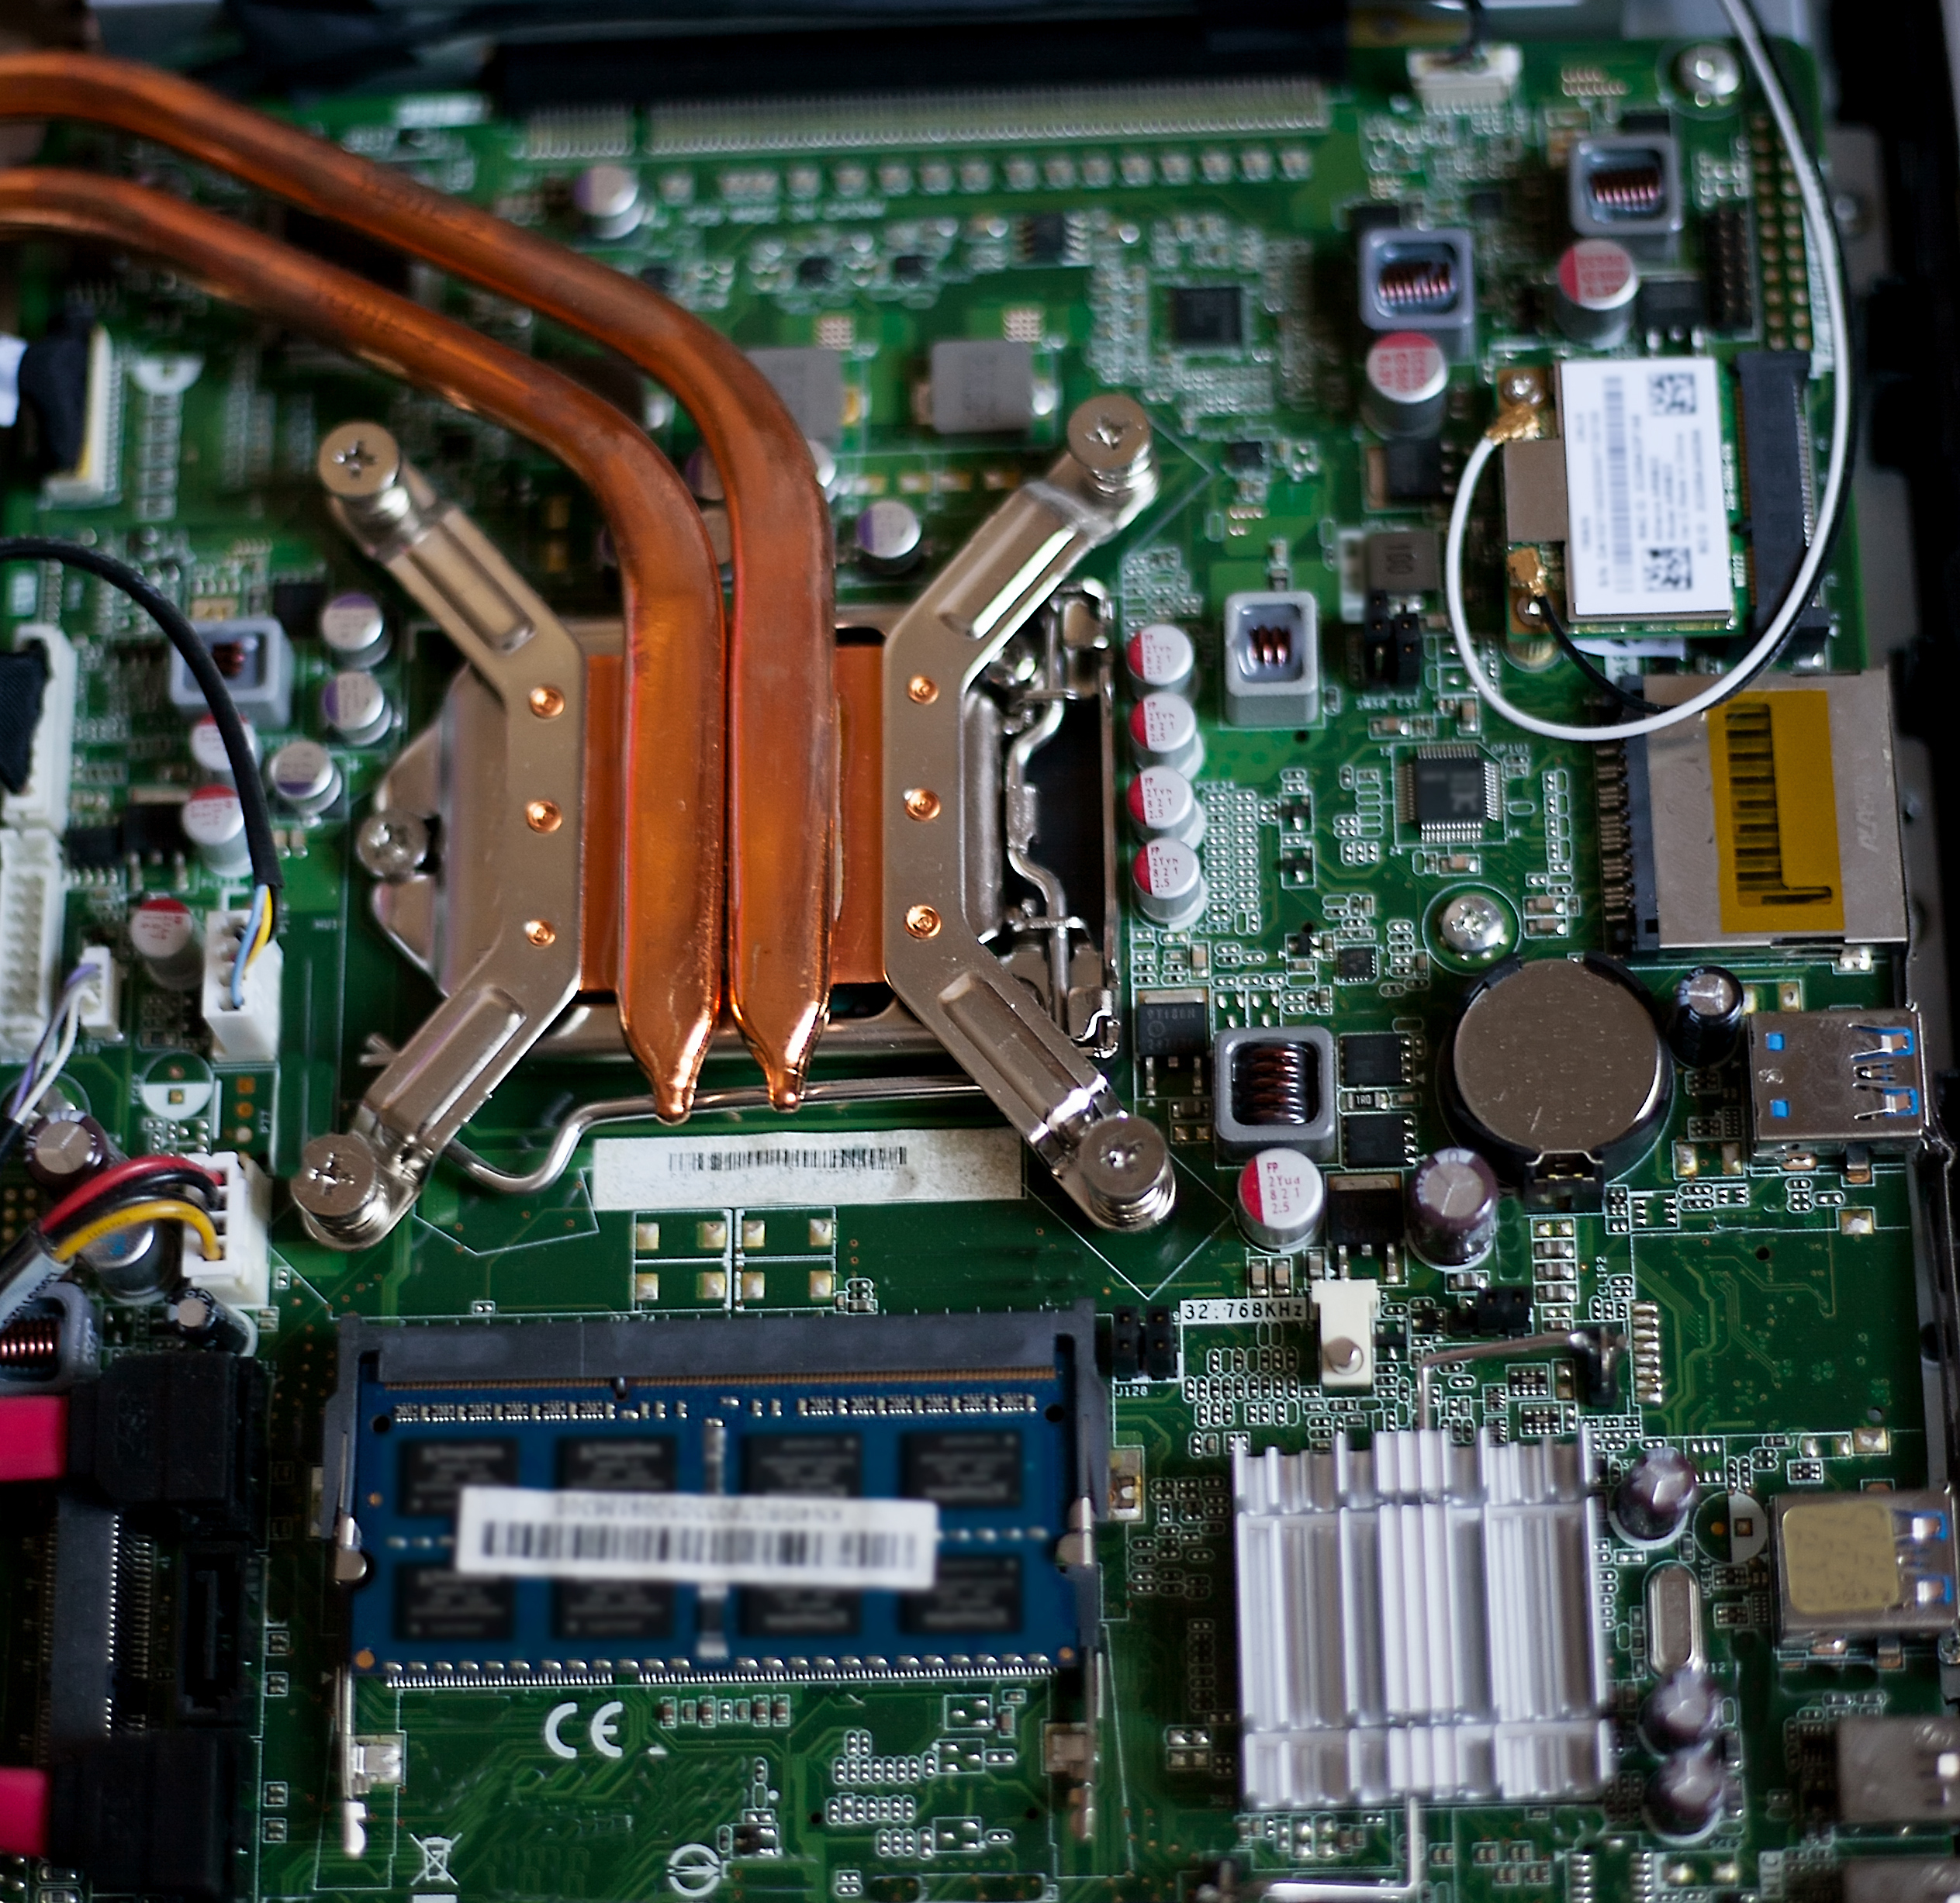 Heat pipes on a circuit board